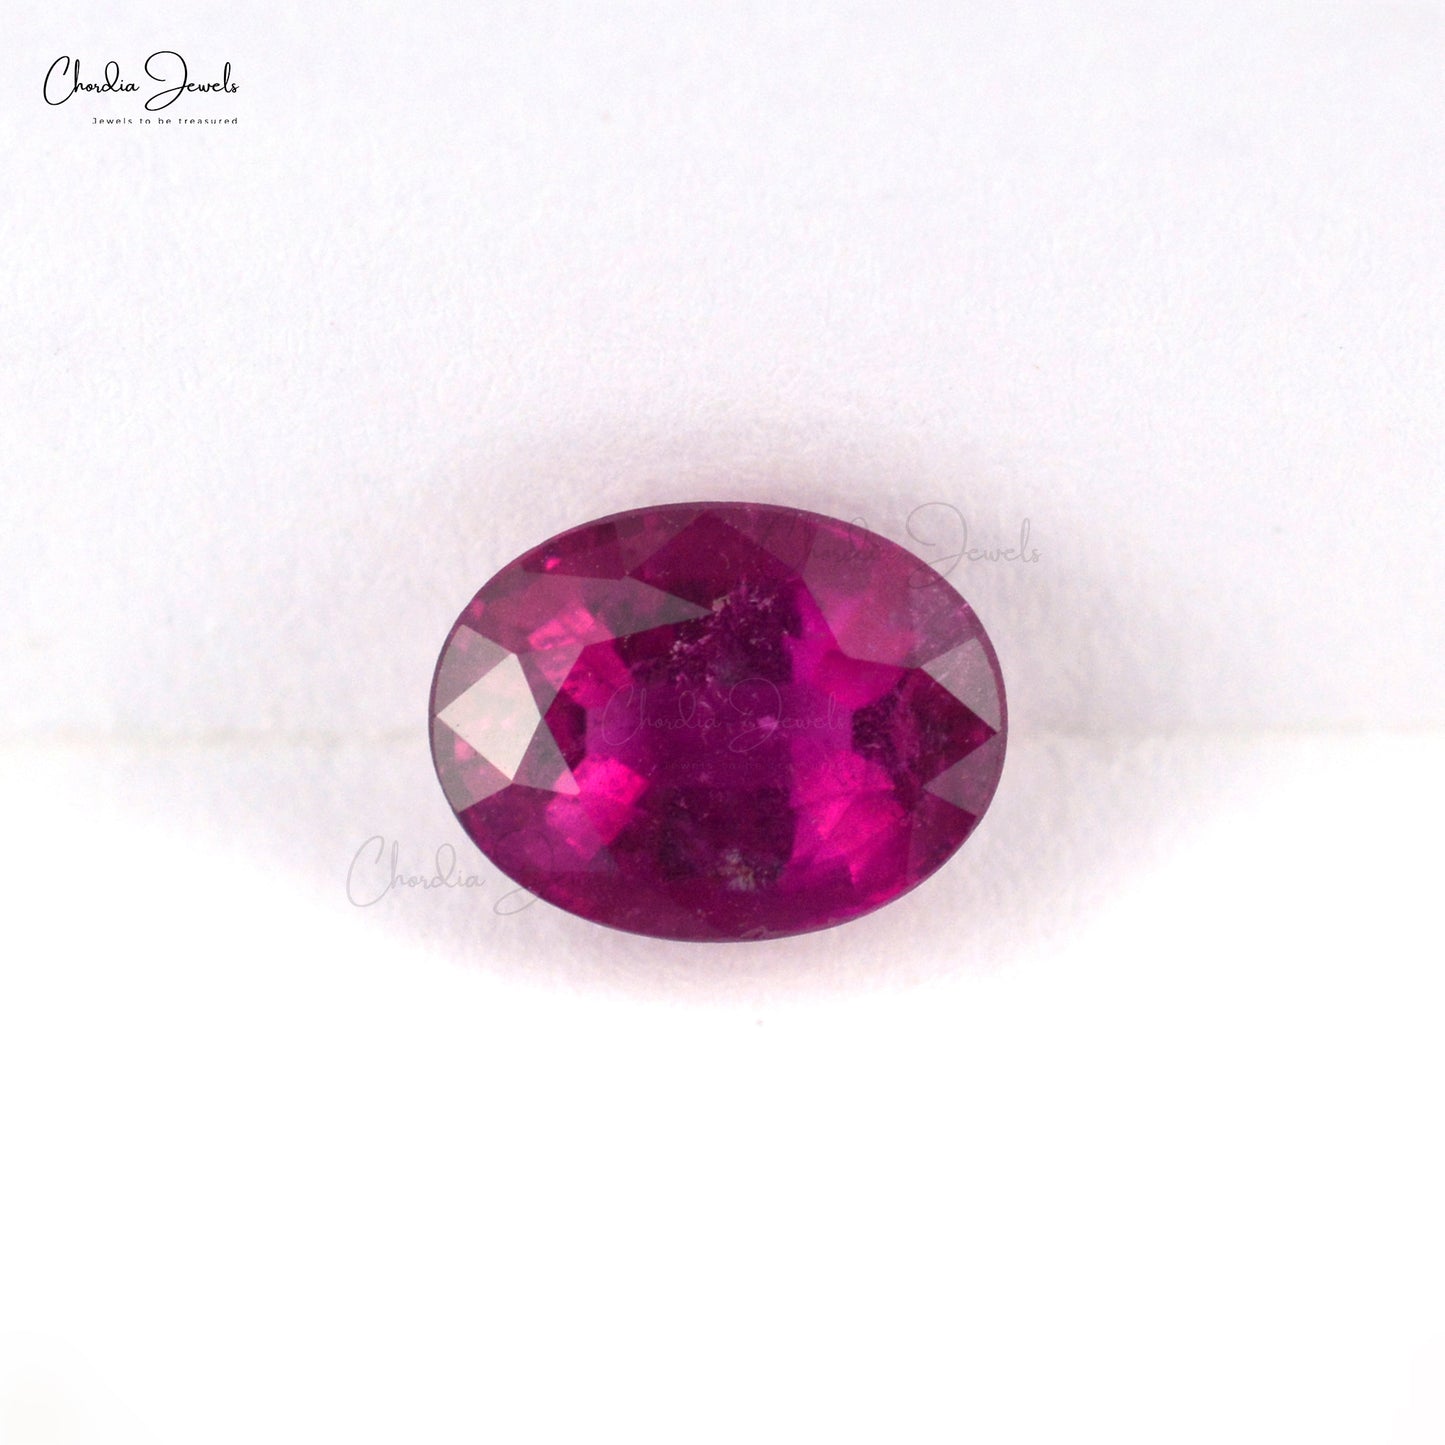 Load image into Gallery viewer, Top Grade 1.55 Carat Fine Oval Cut Rubellite Tourmaline Loose Gemstone for Sale, 1 Piece
